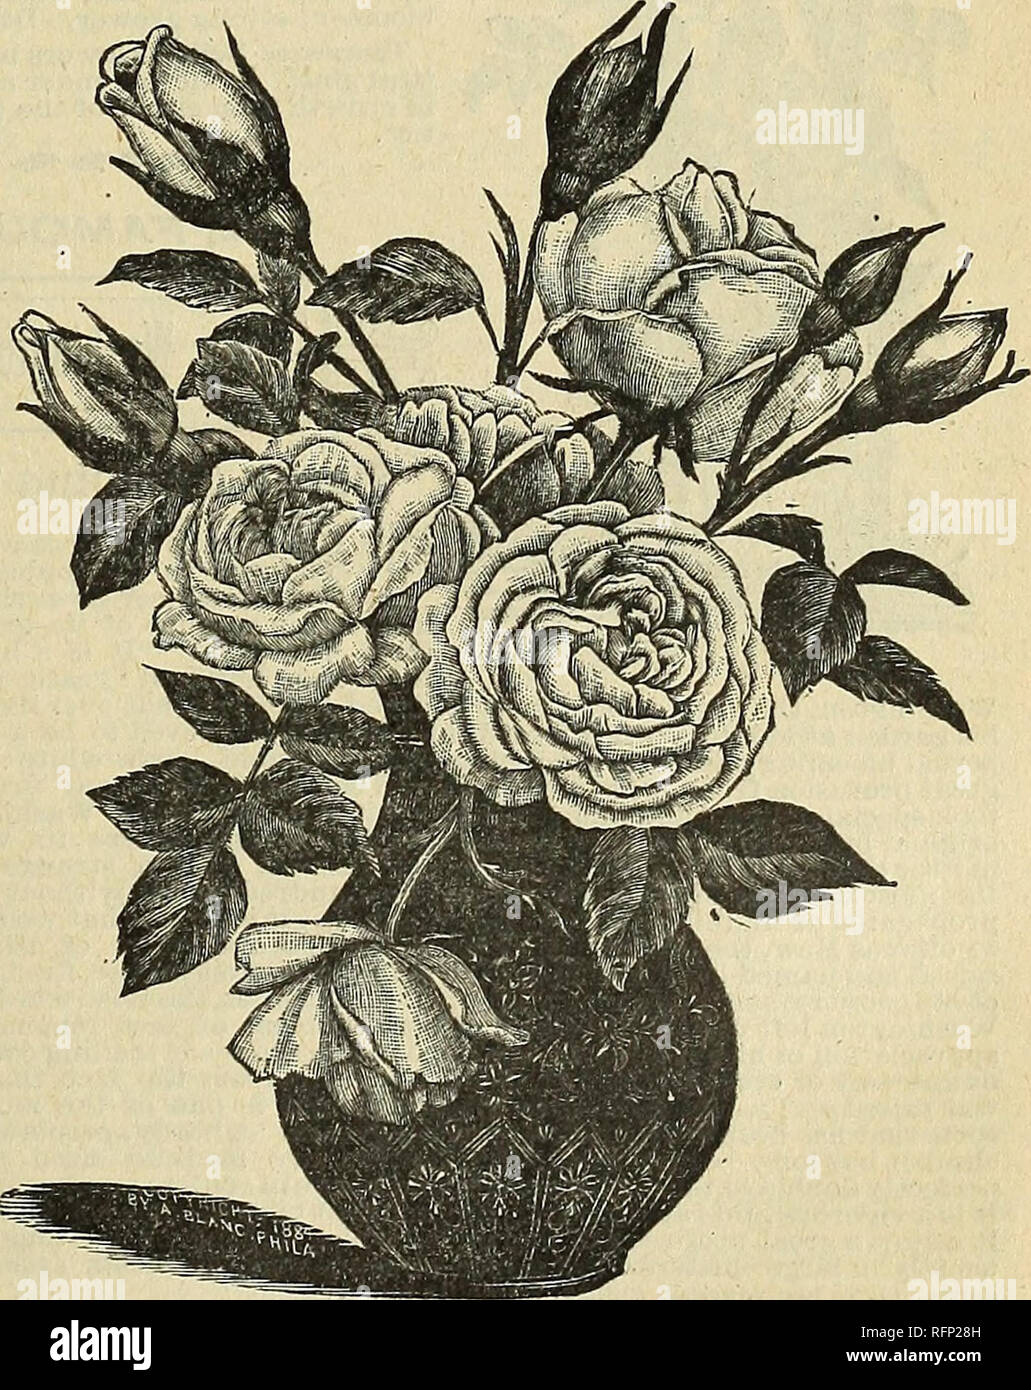 . Floral gems for 1896. Flowers Seeds Catalogs; Bulbs (Plants) Catalogs; Roses Catalogs; Plants, Ornamental Catalogs; Commercial catalogs Ohio Springfield; Flowers; Bulbs (Plants); Roses; Plants, Ornamental; Commercial catalogs. s If 6*2 Jj fa n.2 2 -2 CO JO 00 01 Â© polyantha, or Fairy Roses. Price, 8 cents each; two-year-old plants, 20 cents. Little PetâAs it opens the bud appears of bluish color, but it is soon seen that it is only upon the back of the outer row of petals, the other portion of the rose being pure white. nignonetteâA lovely Fairy Rose, full, regular flowers, per- fectly doub Stock Photo